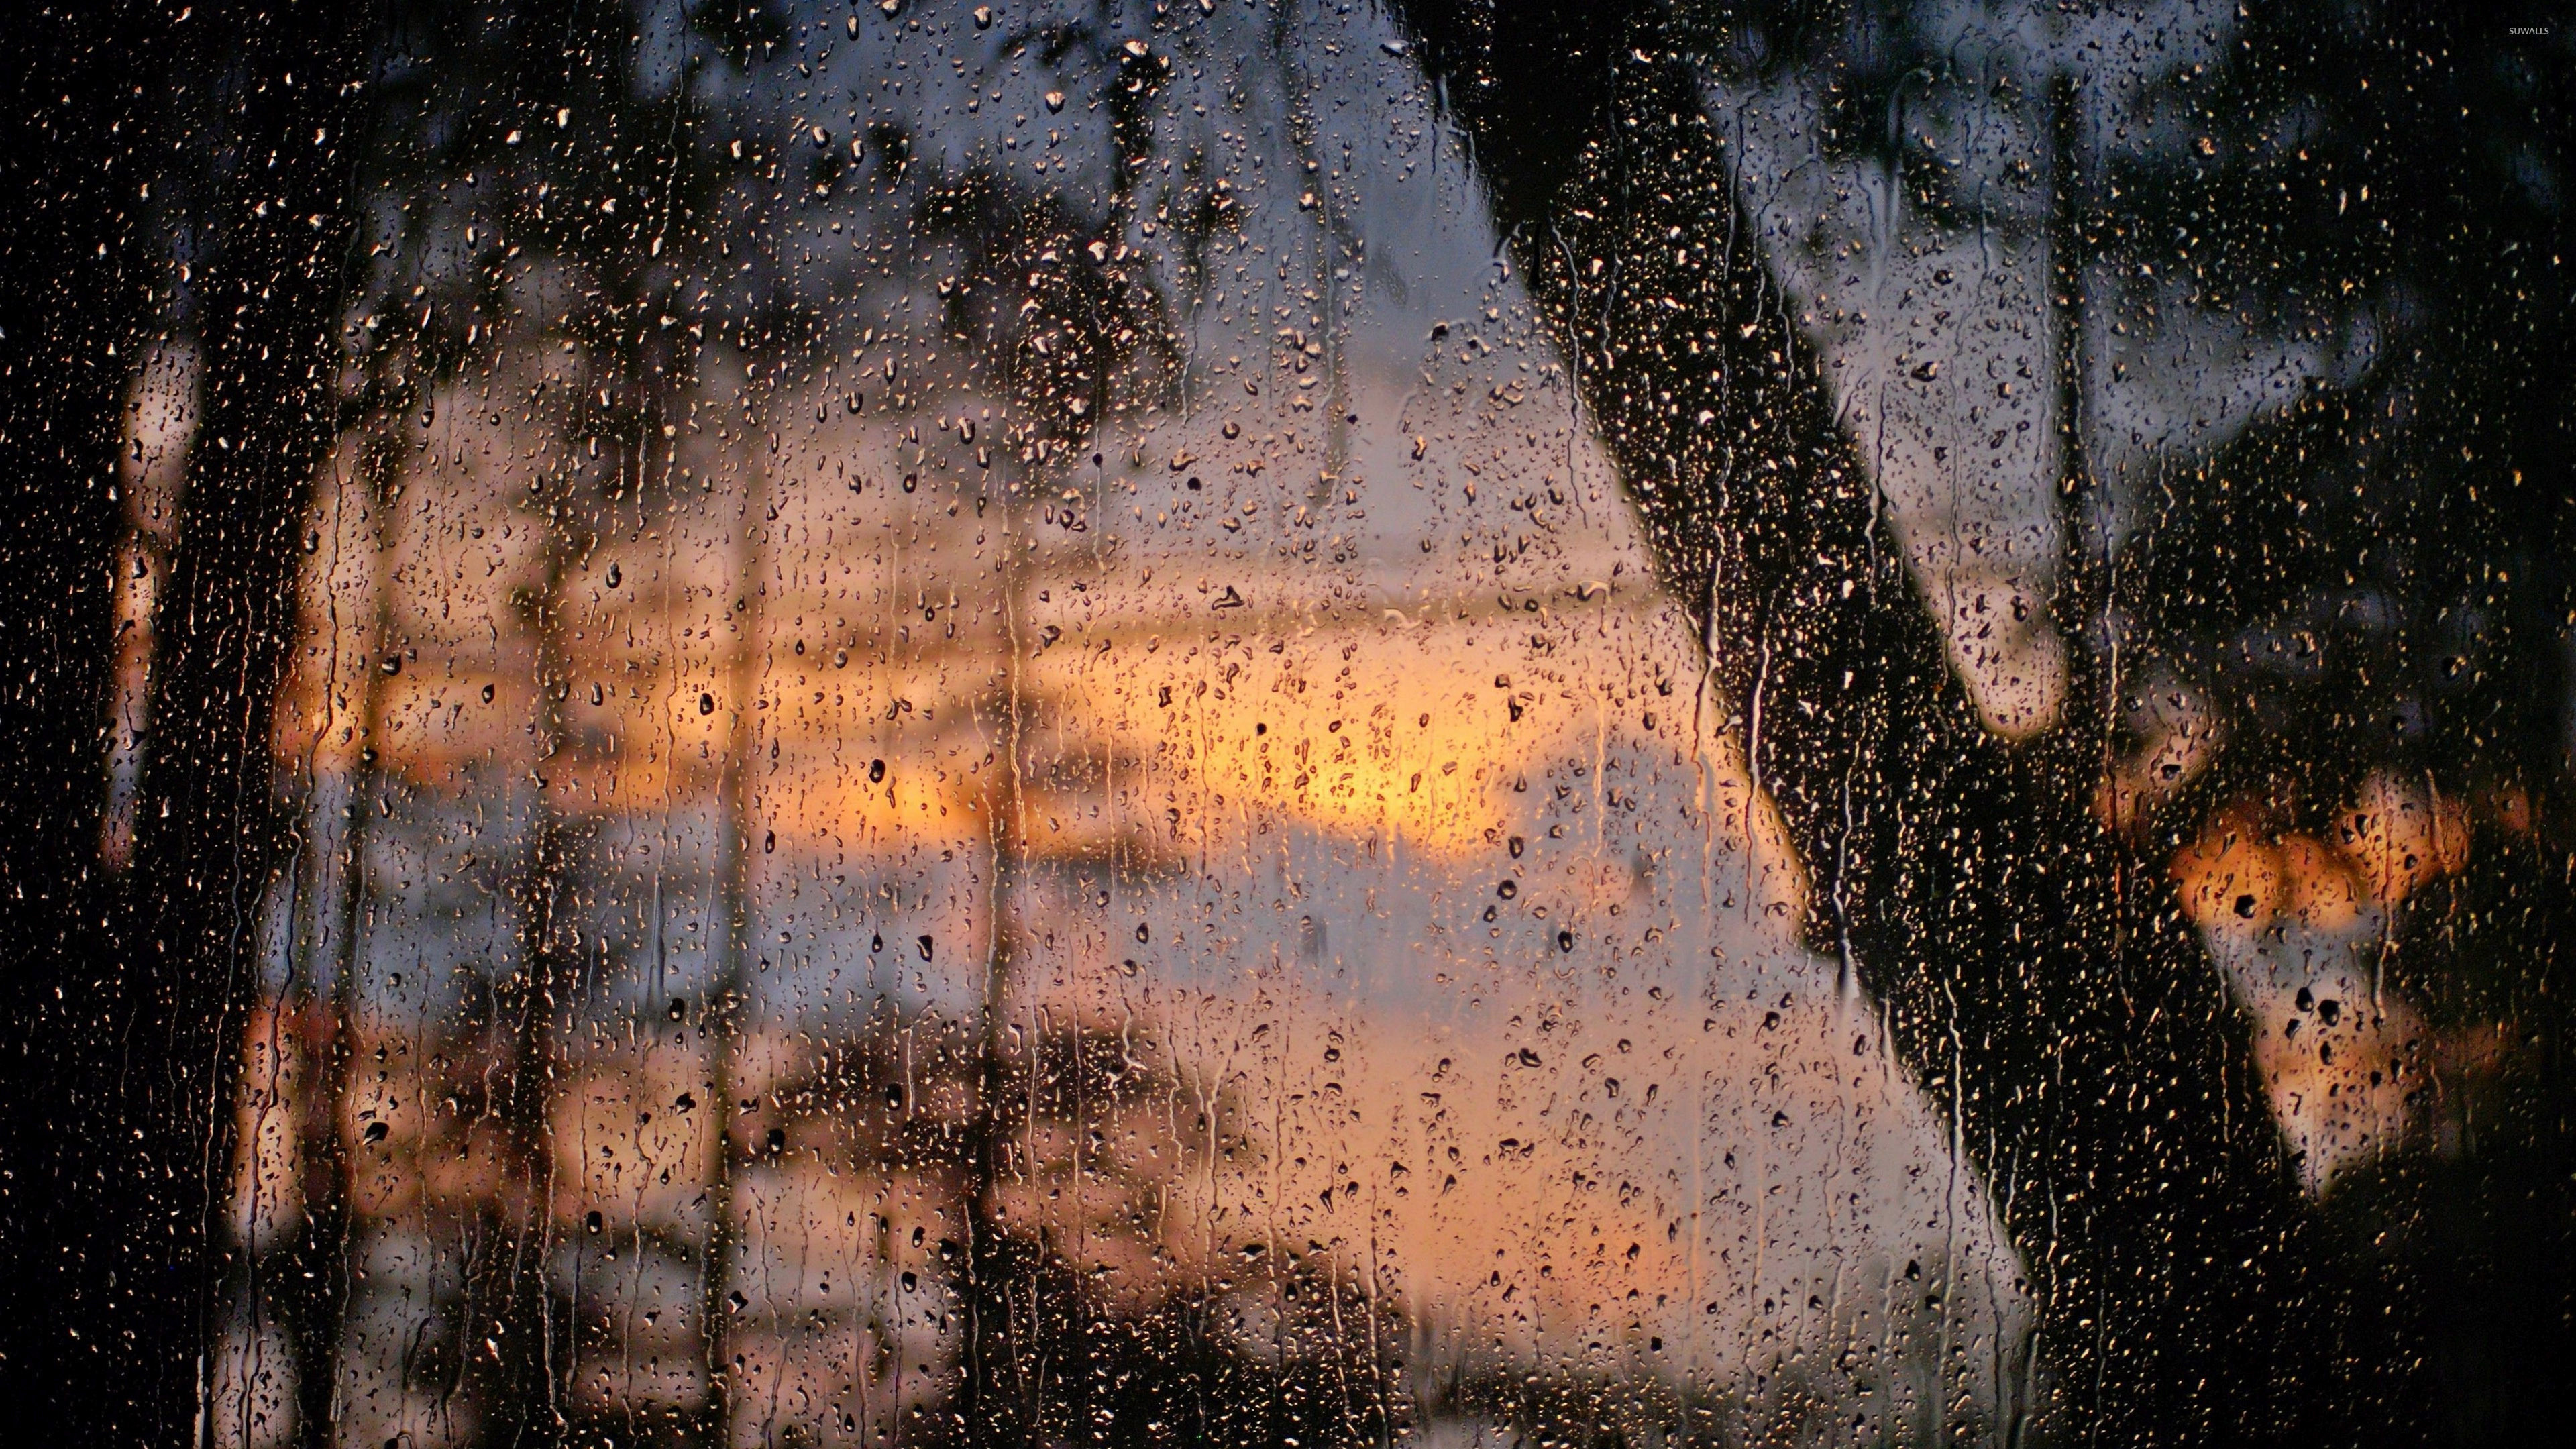 750 Rainy Window Pictures  Download Free Images on Unsplash